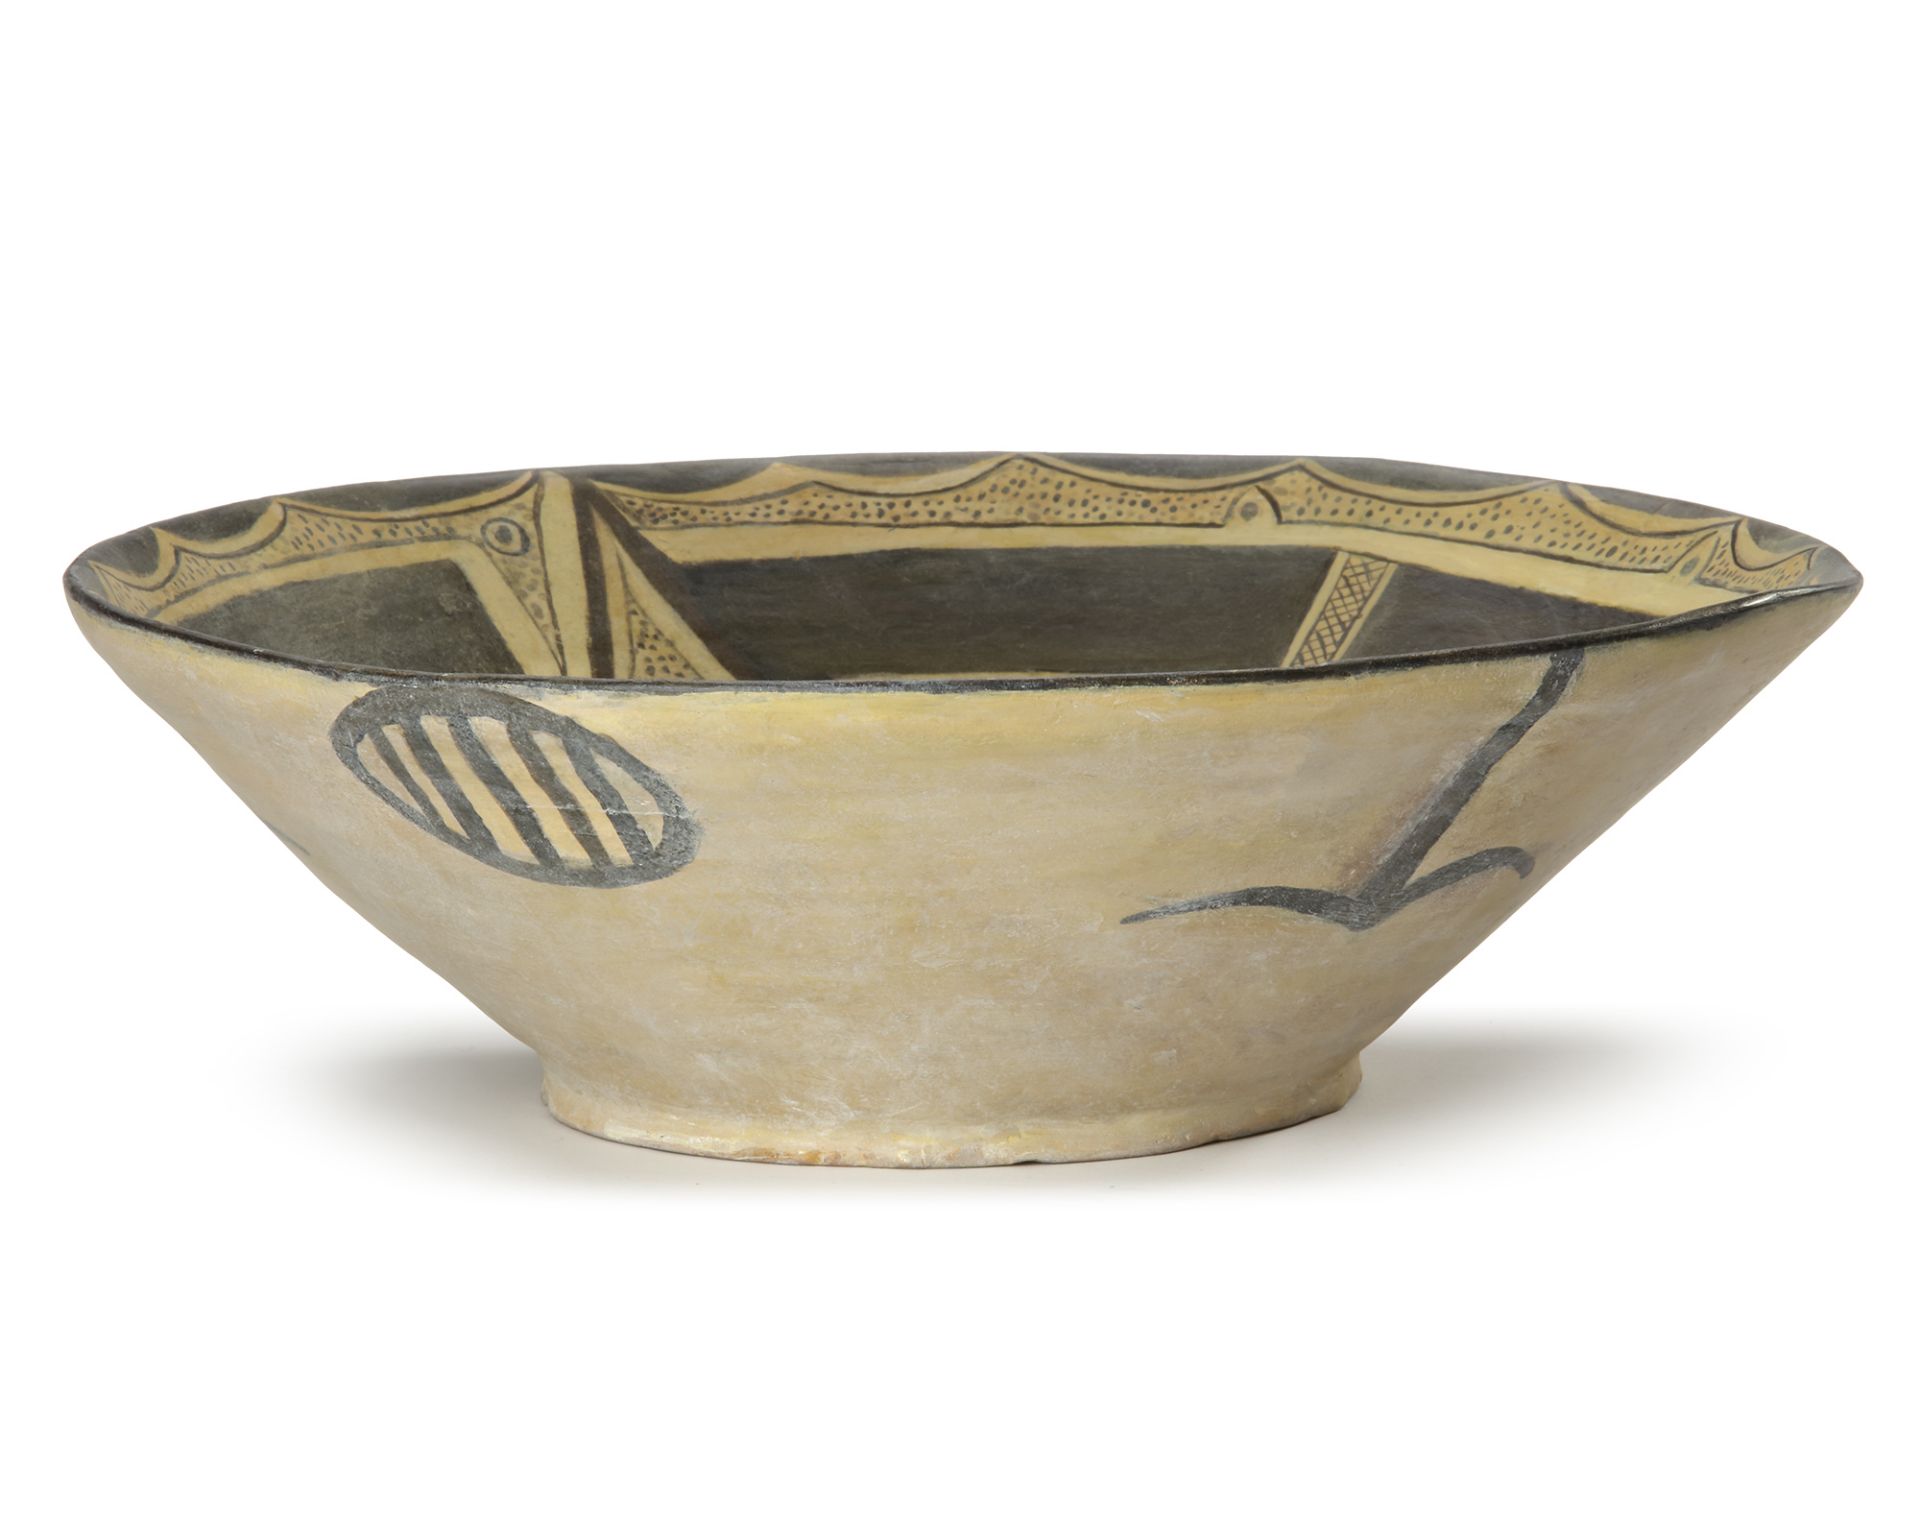 A NISHAPUR POTTERY BOWL, EASTERN PERSIA, 10TH CENTURY - Image 4 of 5